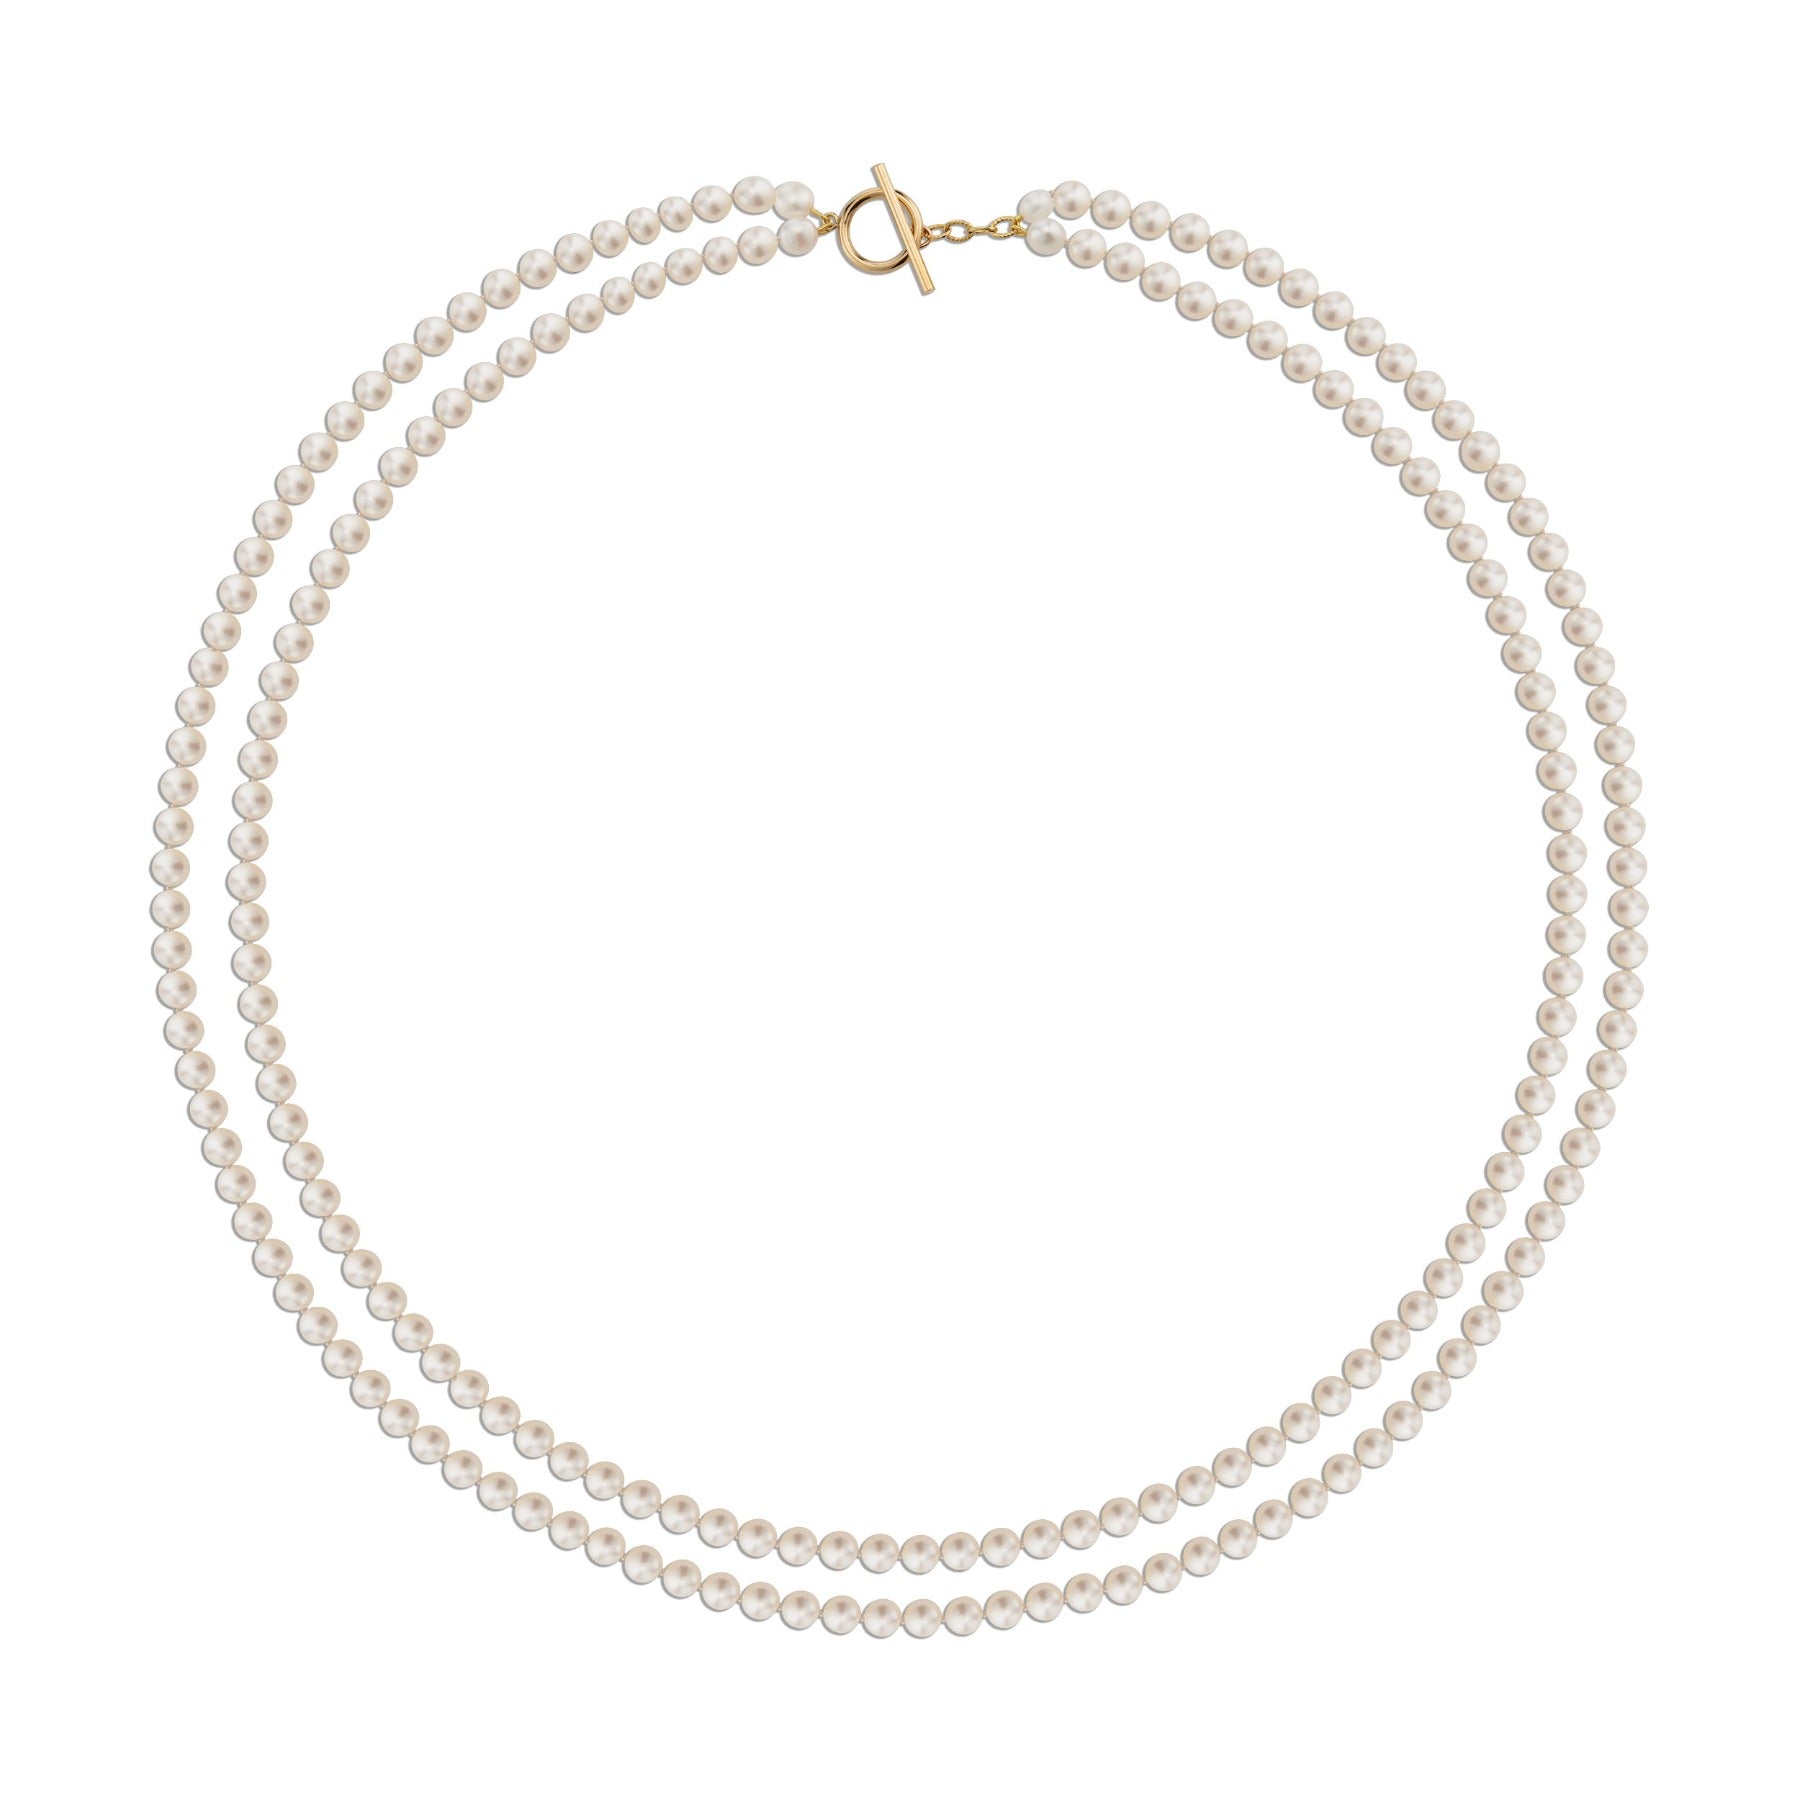 Long opera length button white pearl necklace with 14k gold filled toggle clasp.